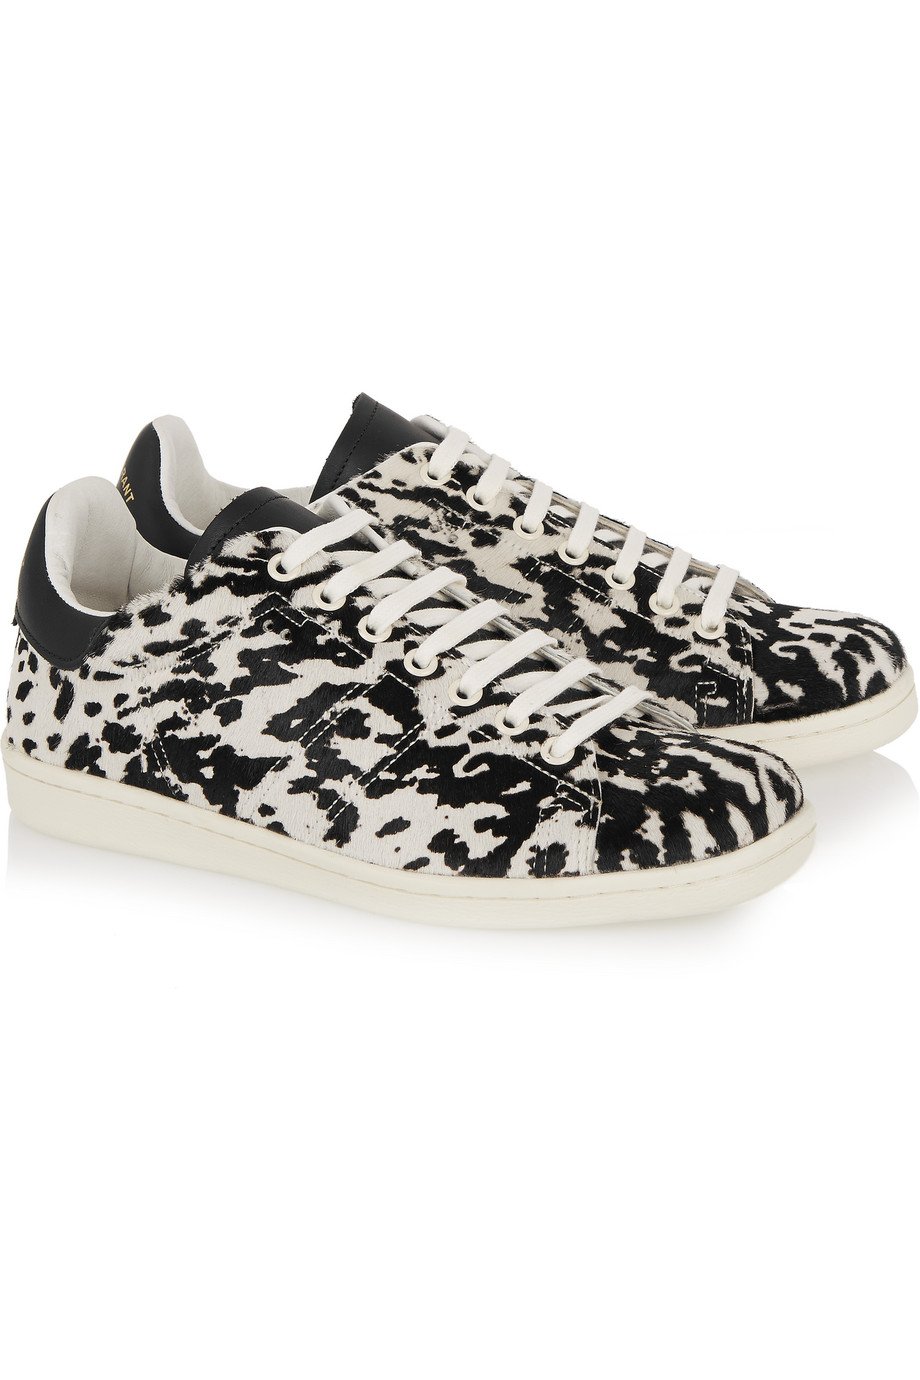 Forge Vil have Due Étoile Isabel Marant Bart Sneakers in Black White Animal Print — UFO No More